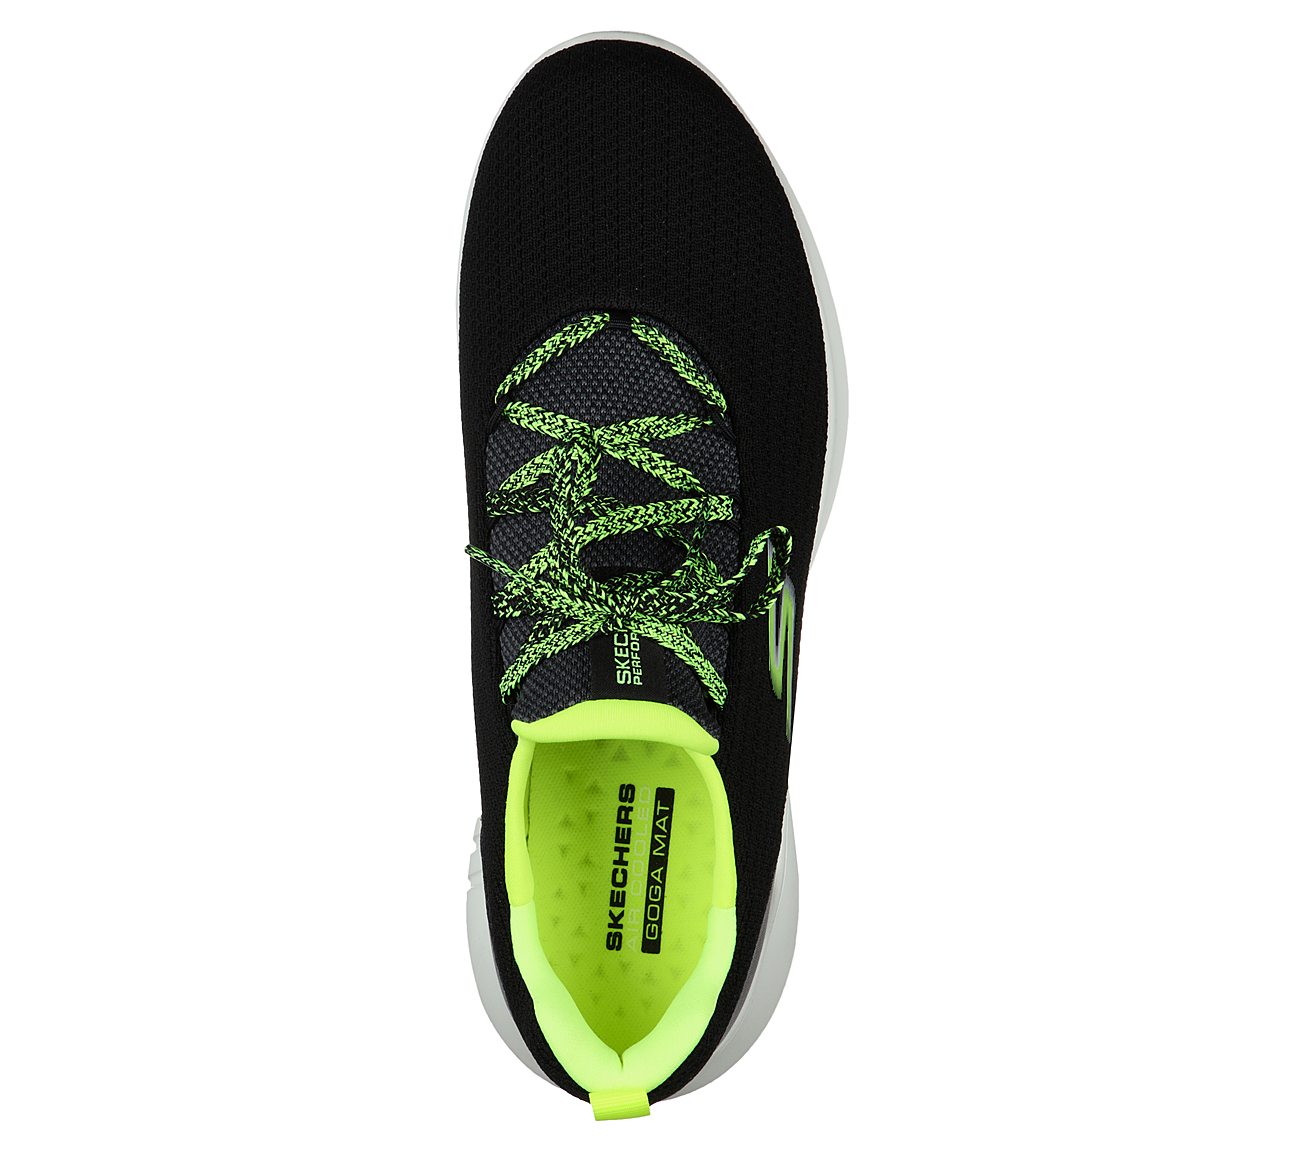 GO RUN MOJO 2.0 - LUCITE, BLACK/LIME Footwear Top View